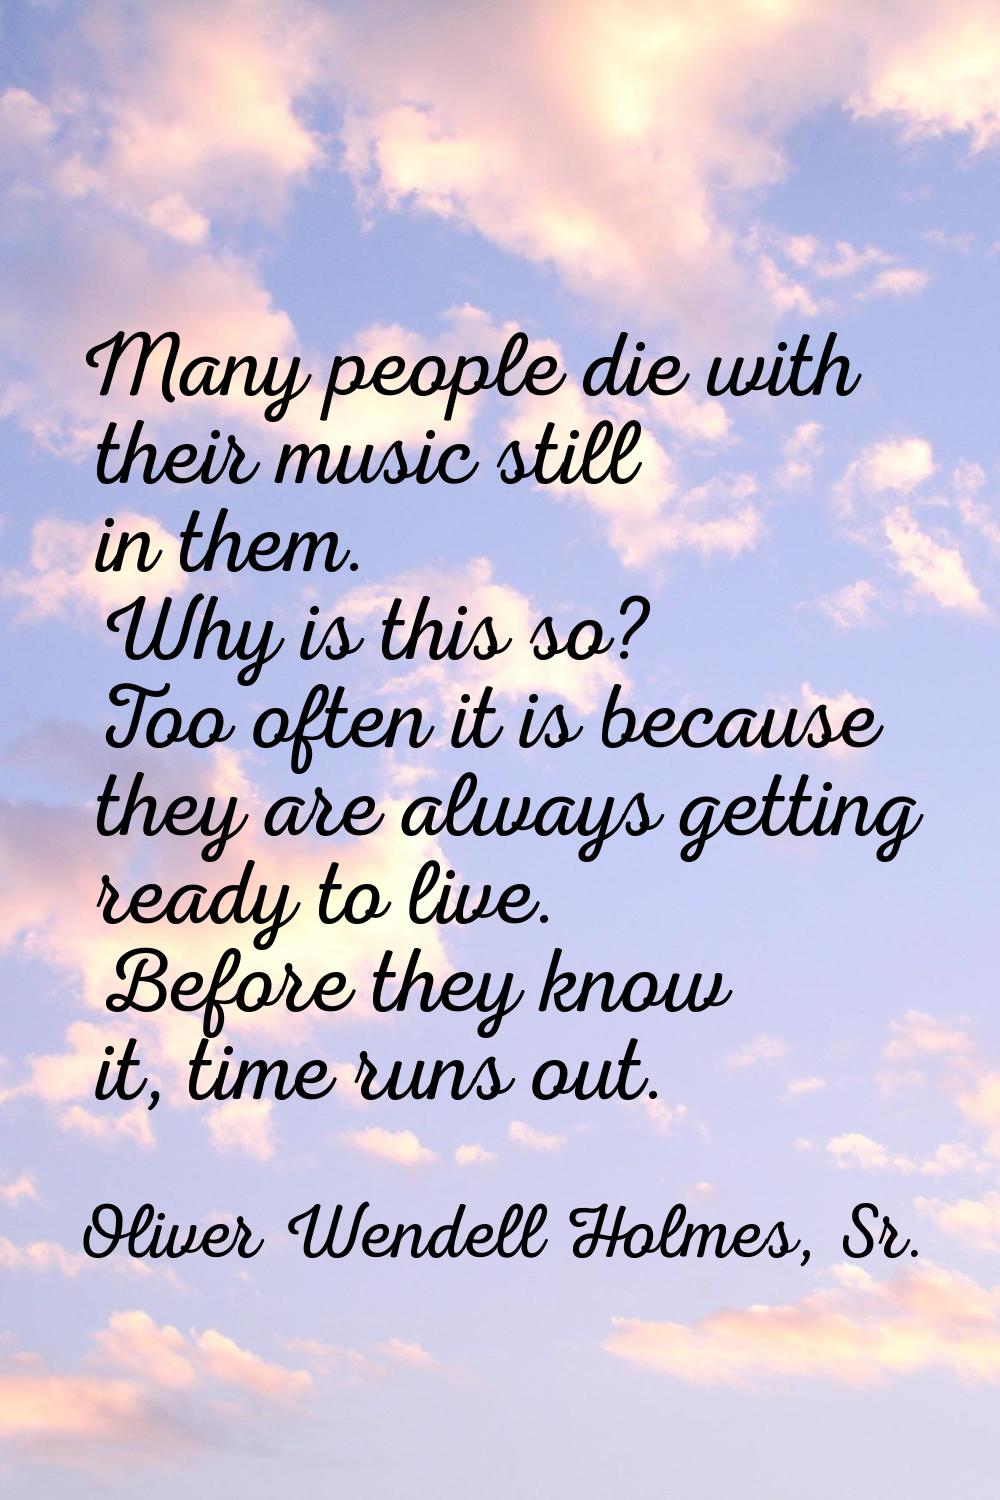 Many people die with their music still in them. Why is this so? Too often it is because they are al